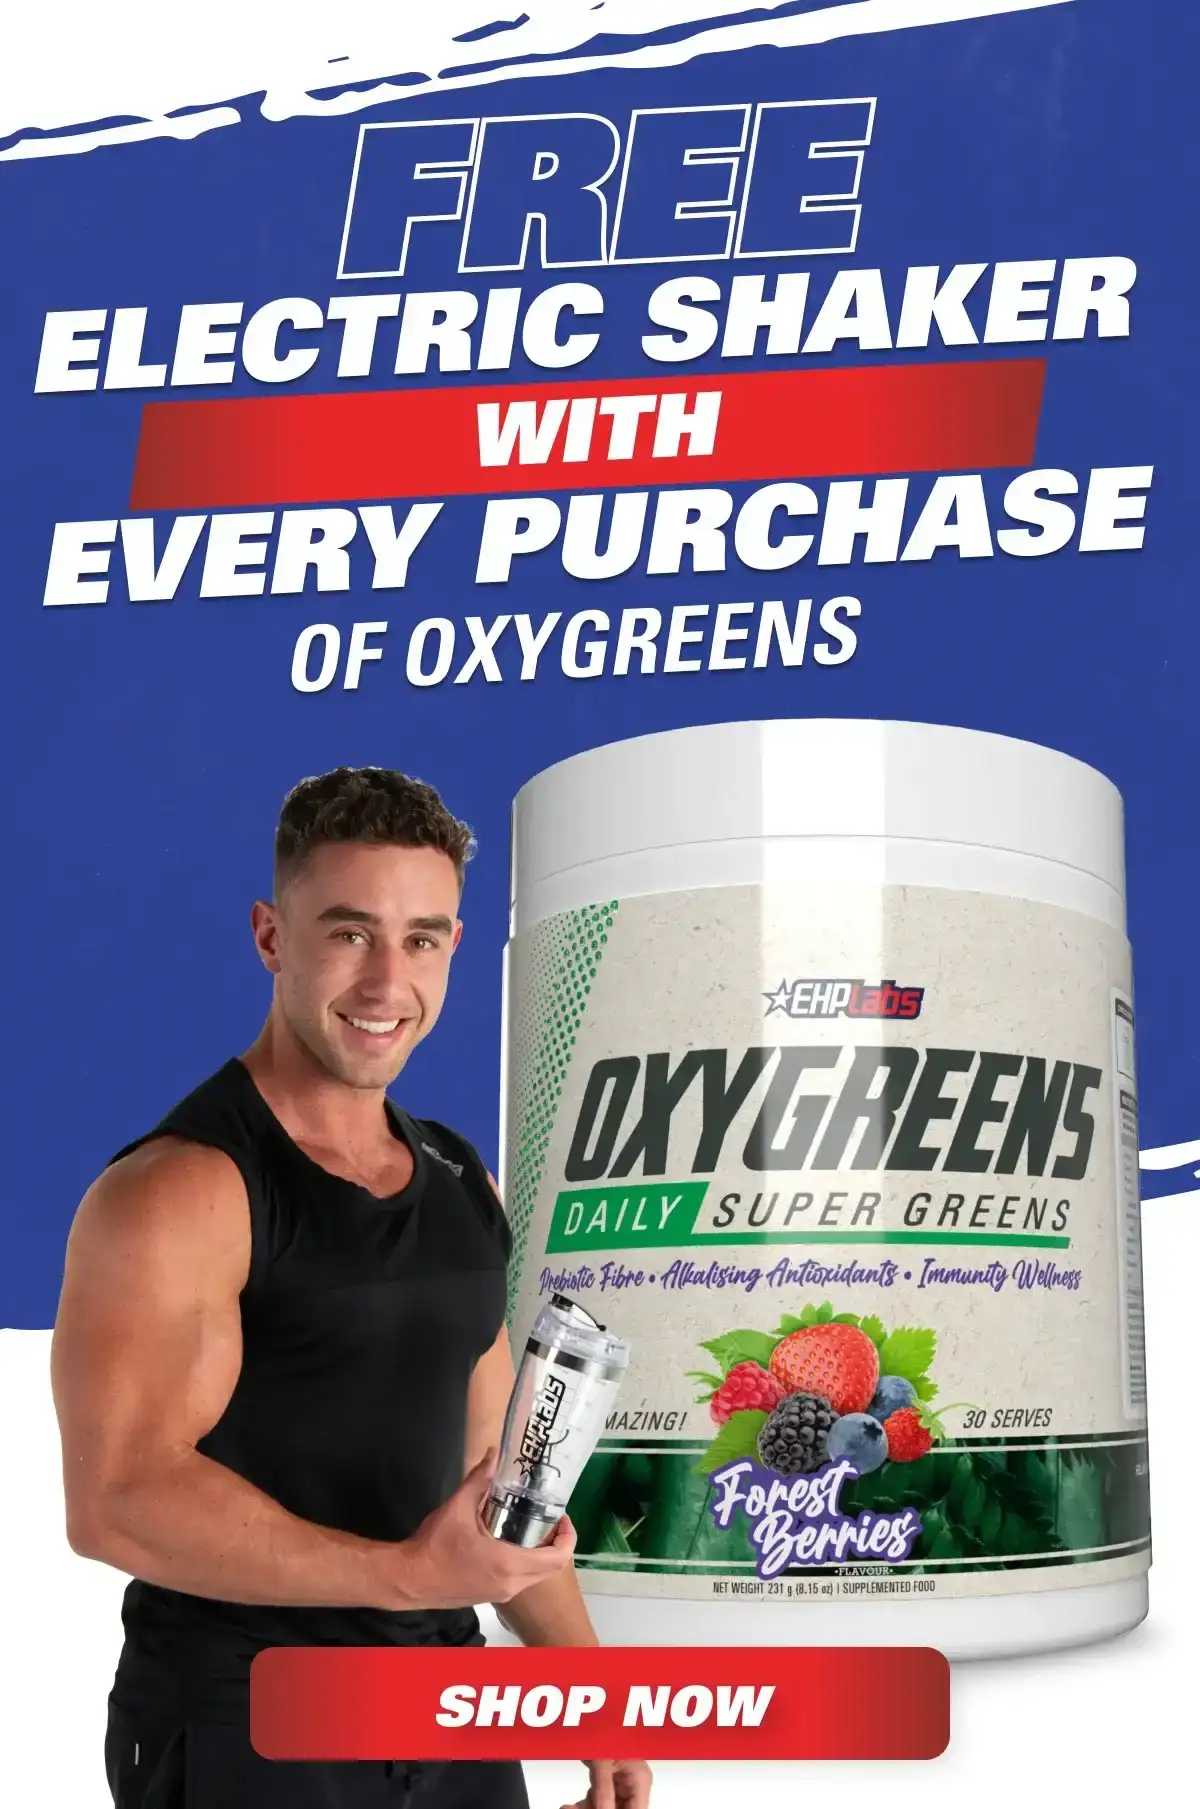 Hey fam! Want a FREE EHPlabs Electric Shaker? Of course you do. For a limited time only, we're giving it to you FREE with any purchase of OxyGreens! Getting your daily greens has never been this easy. This offer won't last forever, fam. Get in and shop now!